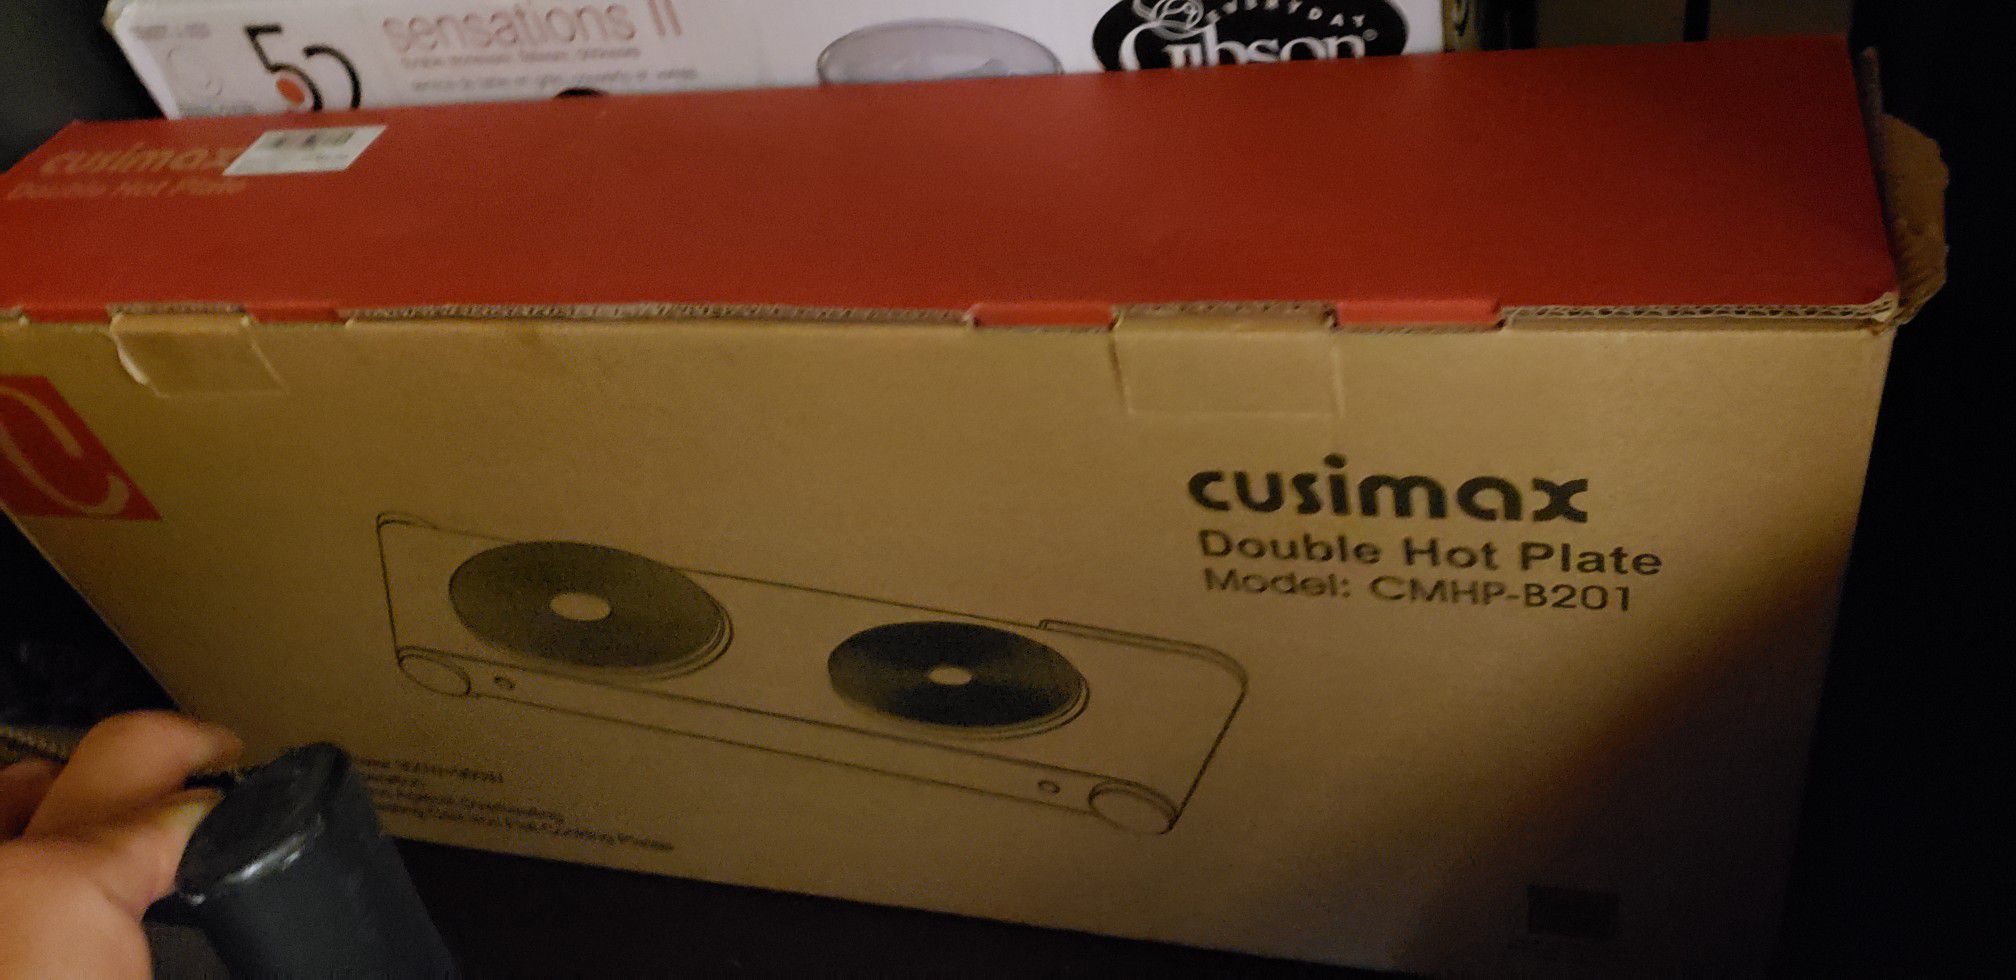 Cusimax double hot plate